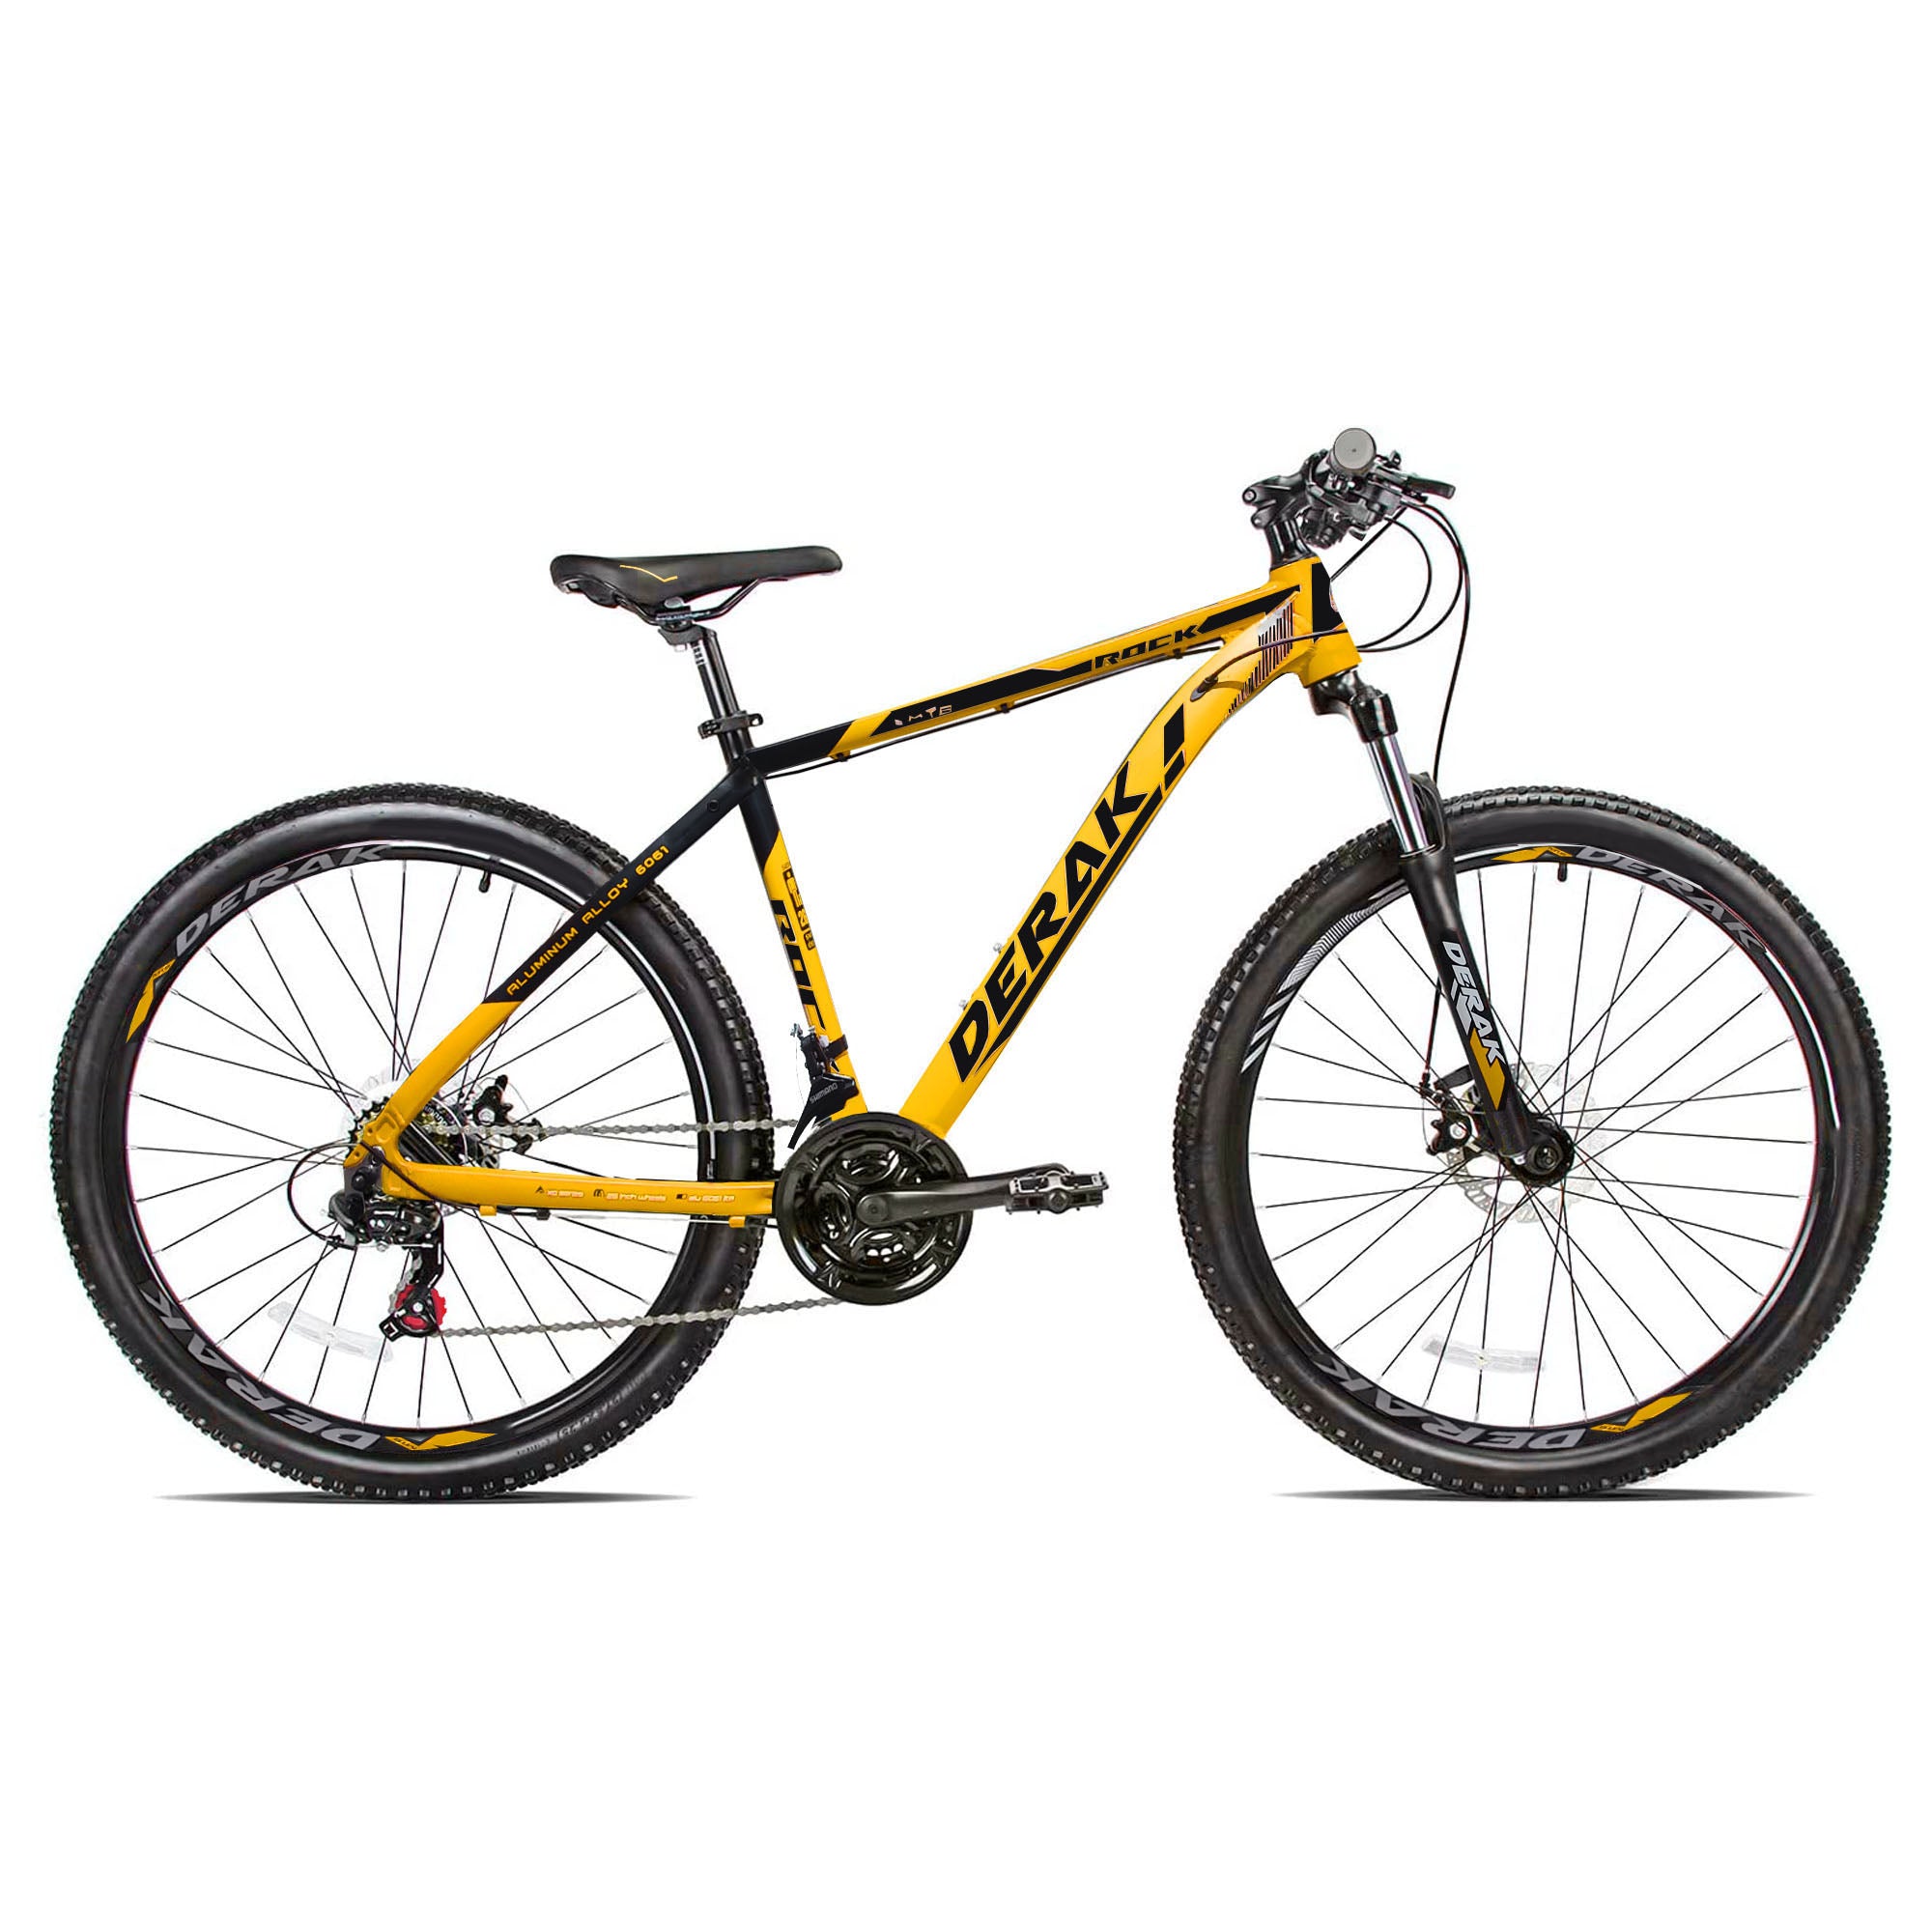 Rock Aluminum Bicycle Adults 26 Inch Yellow (100% Assembled)